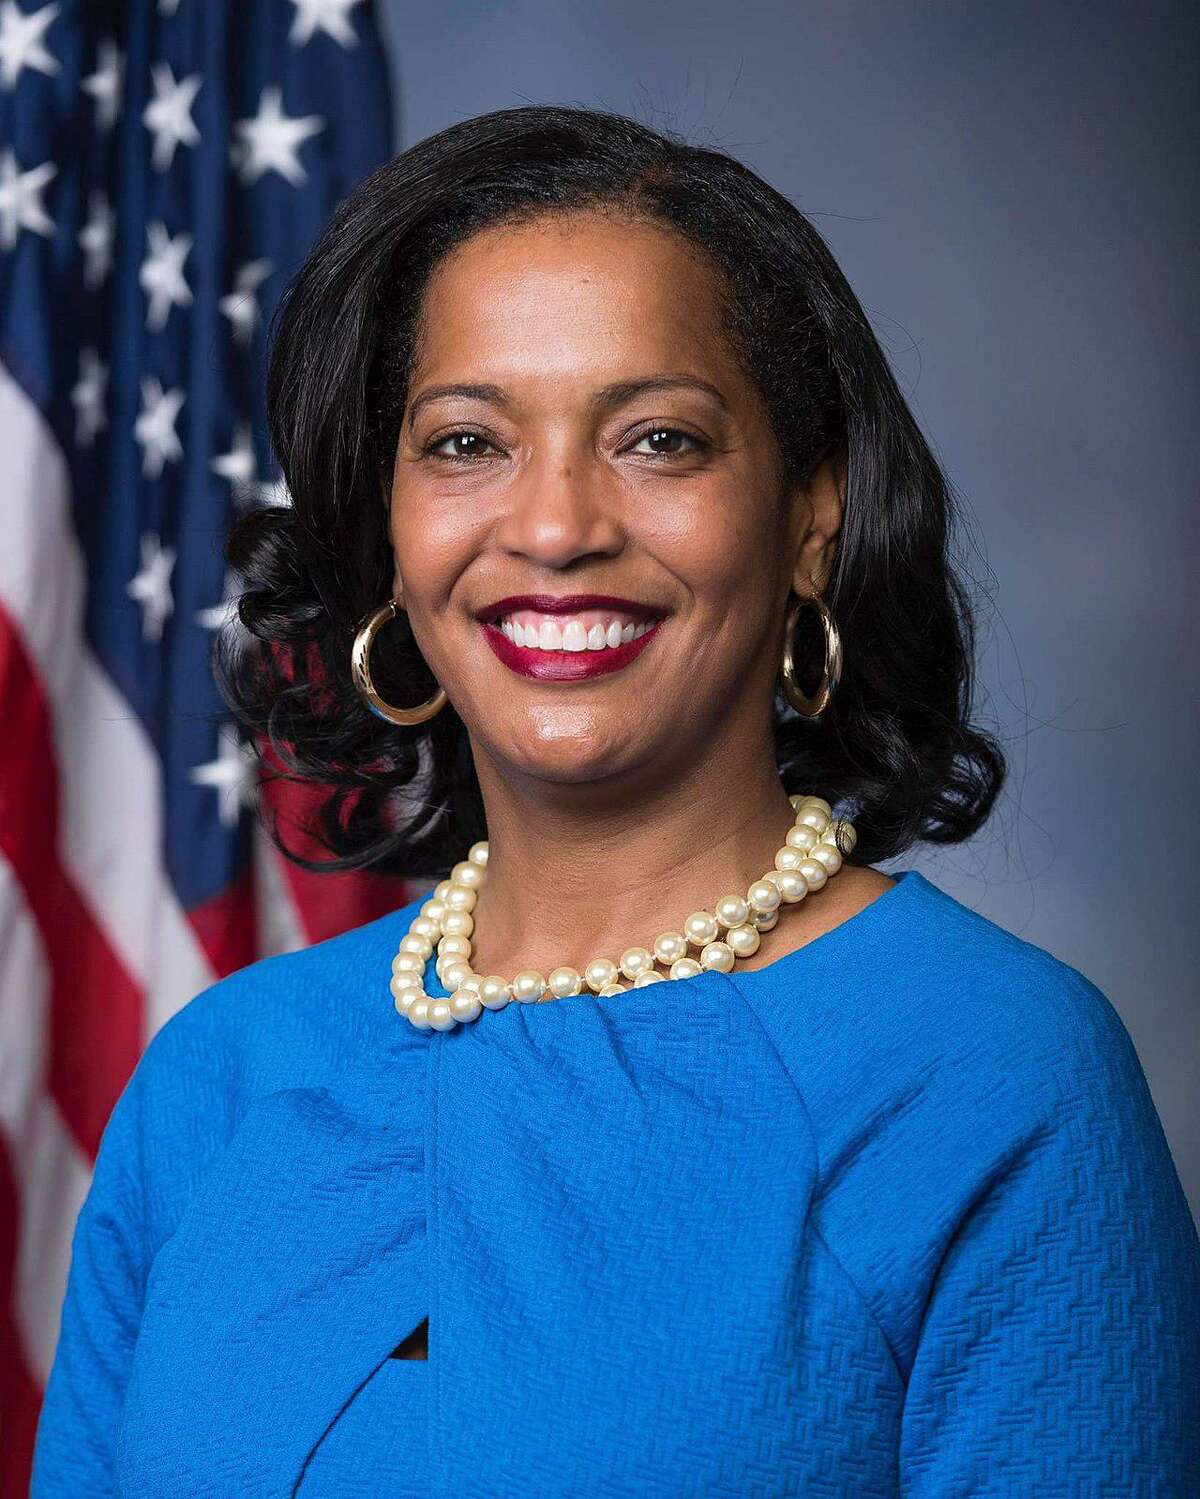 U.S. Rep. Jahana Hayes of Connecticut’s 5th Congressional District.